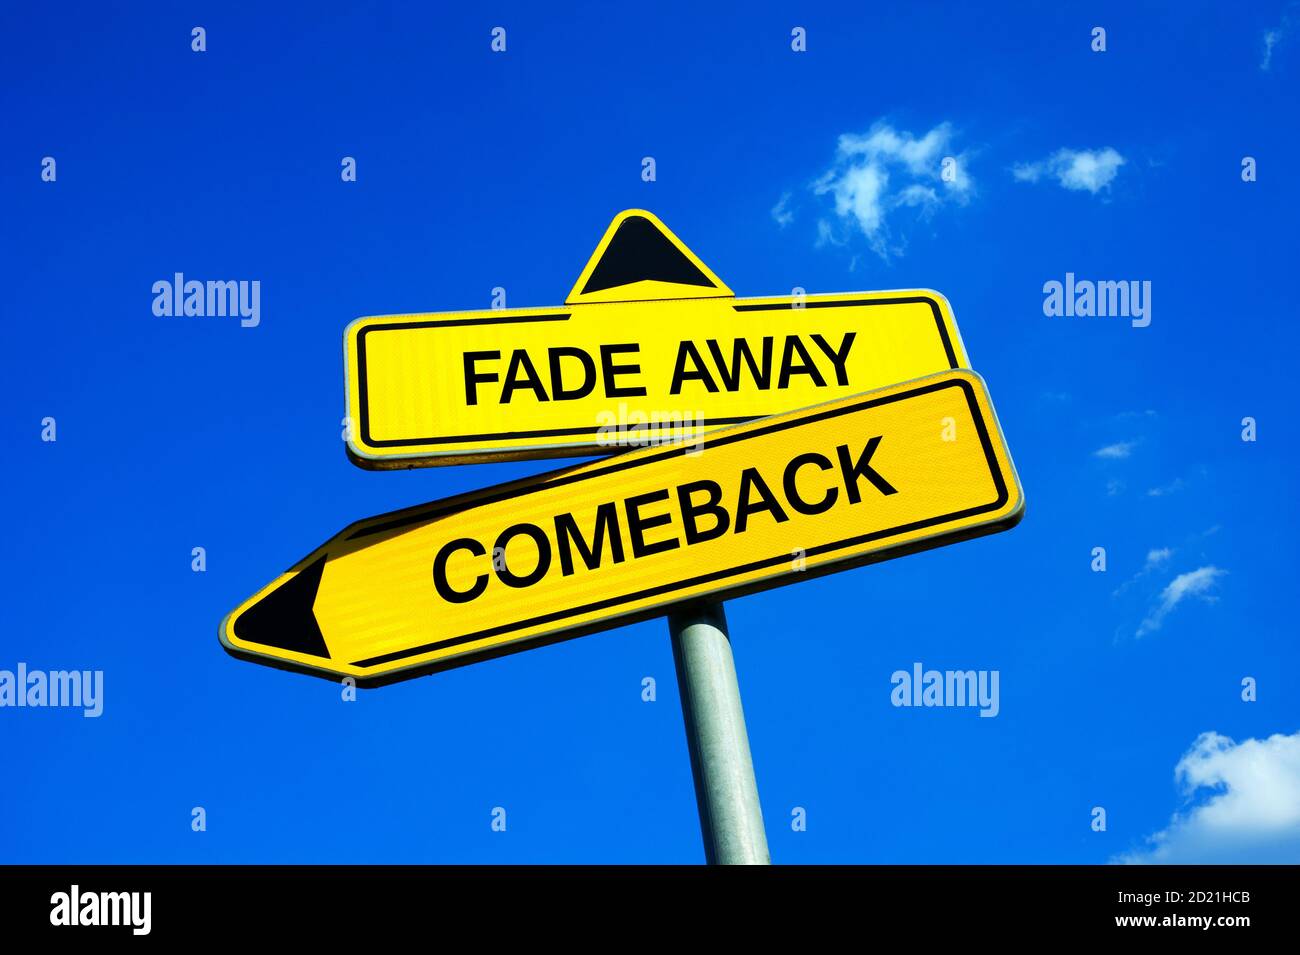 Fade Away vs Comeback - Traffic sign with two options - be forgotten and unsuccessful vip or become famous again after period of obscurity. Decline an Stock Photo